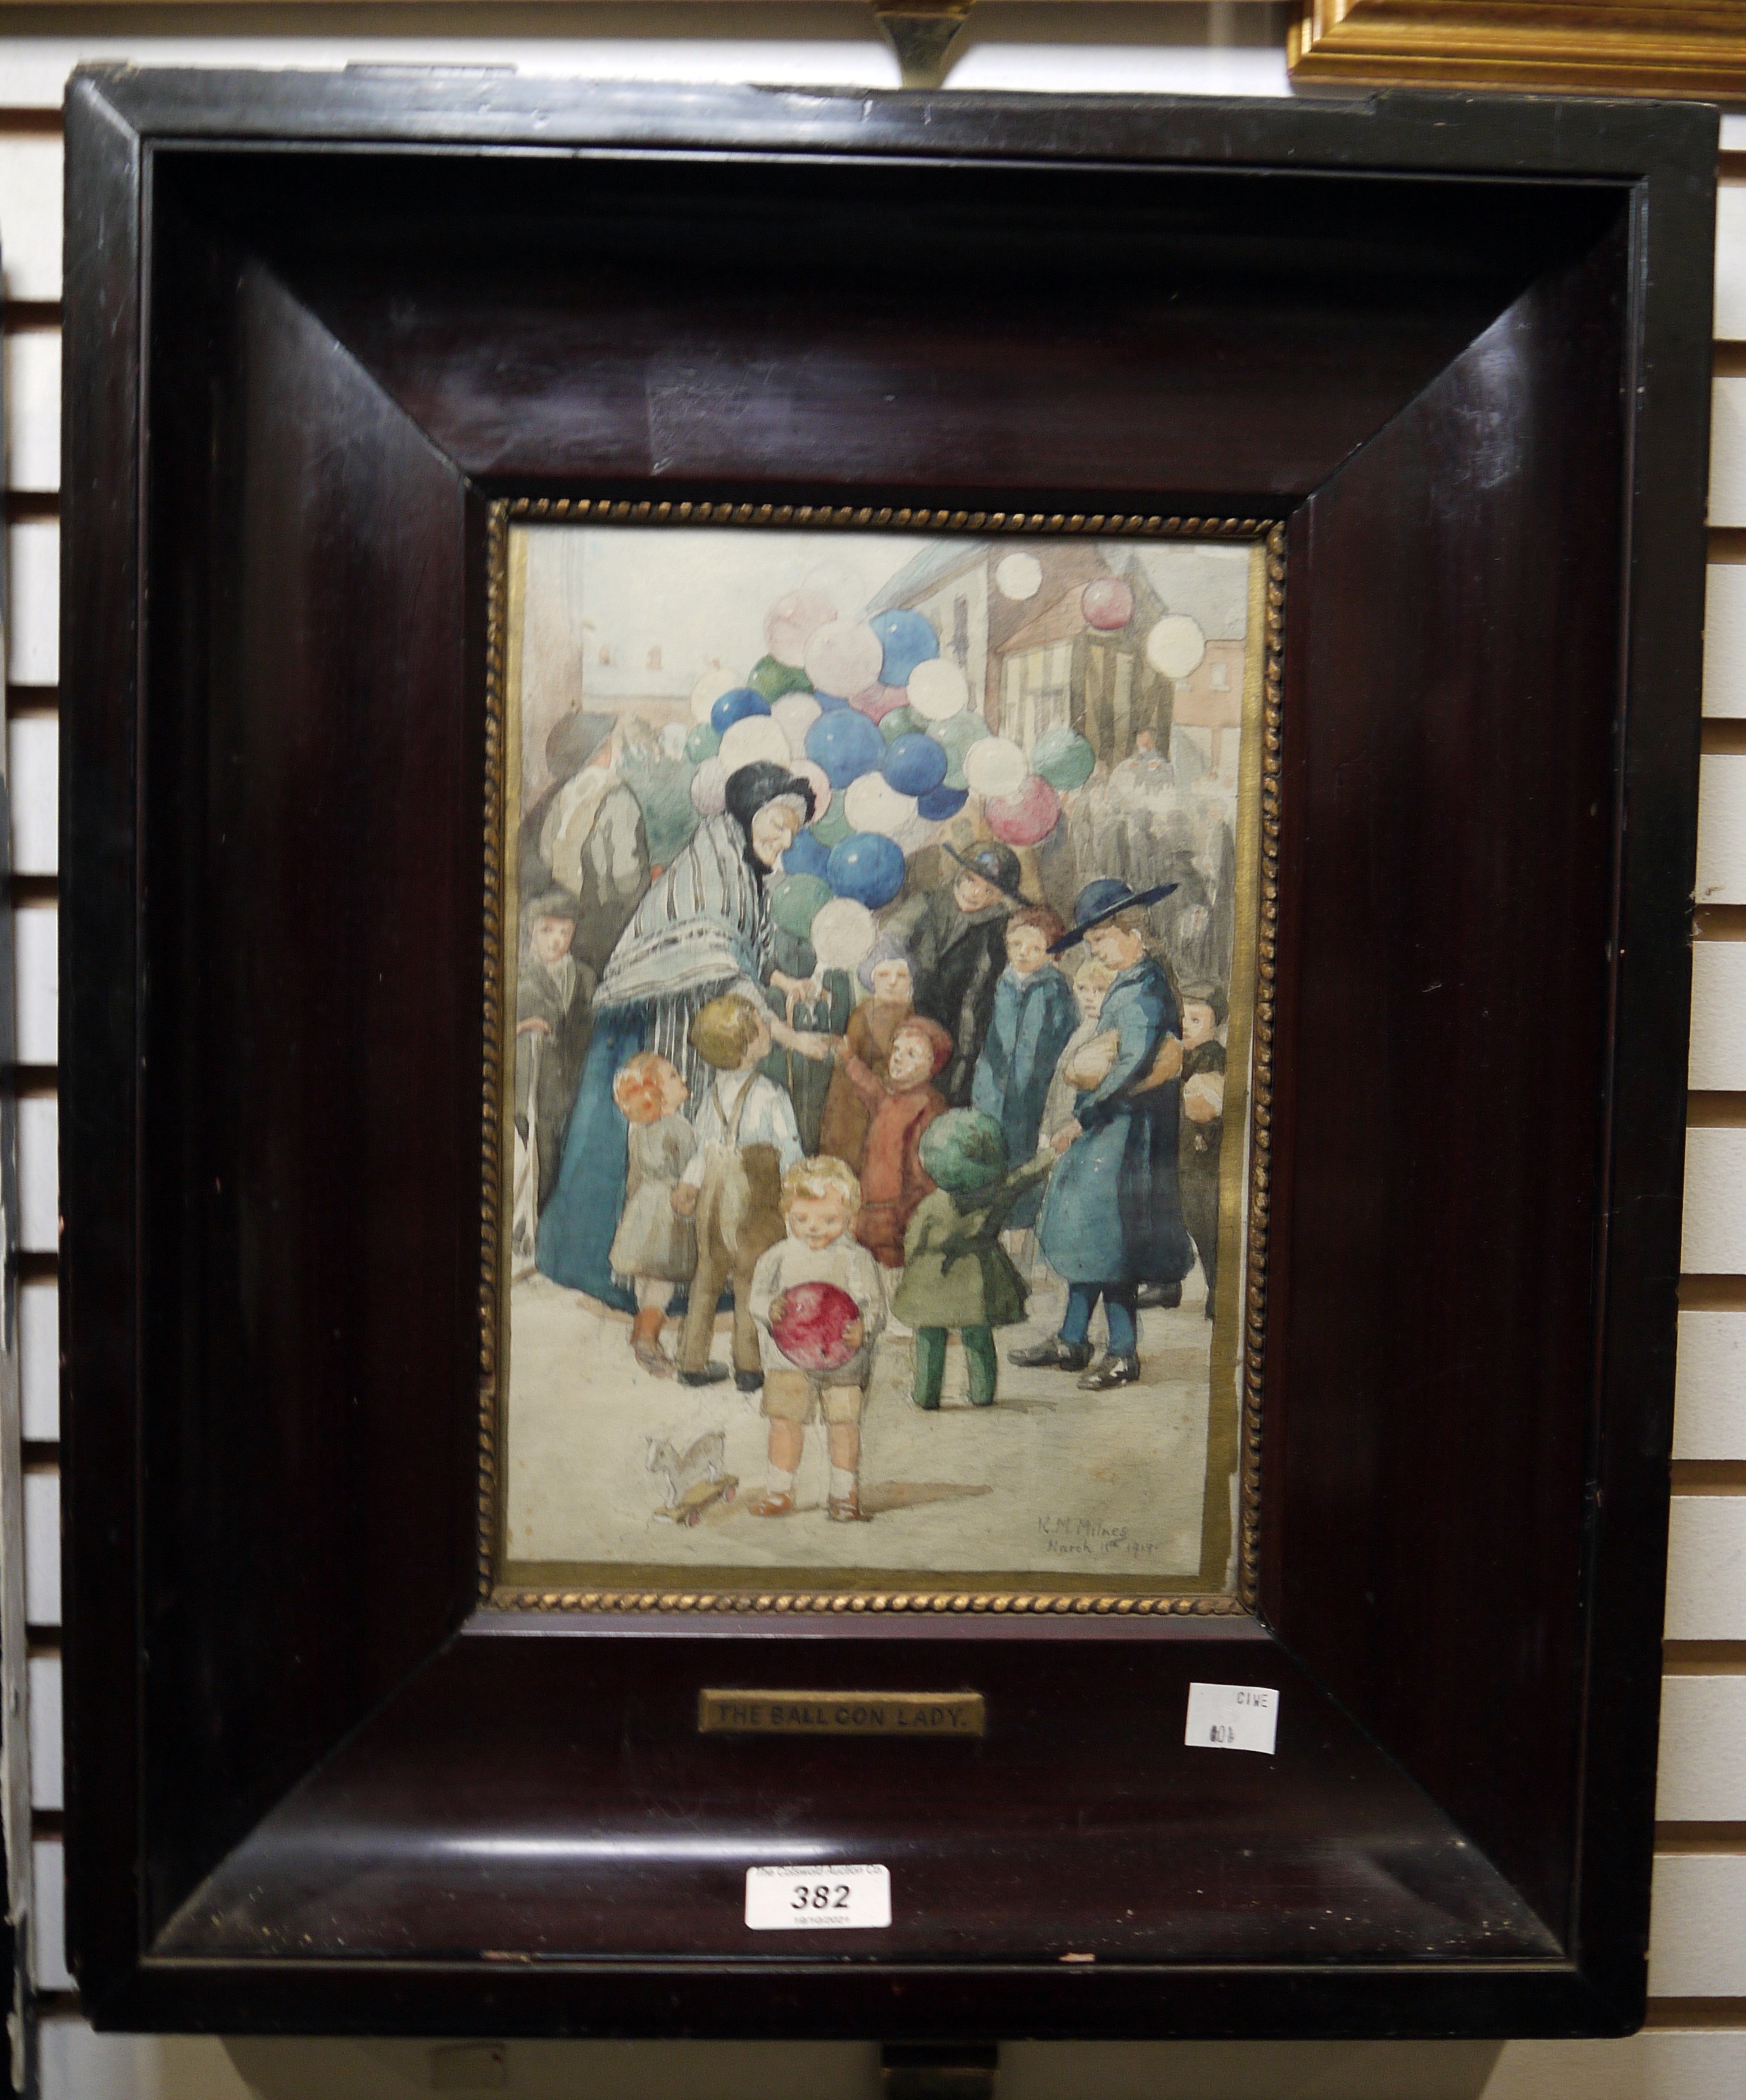 K M Milnes (early 20th century school) Watercolour  "The Balloon Lady", signed in pencil lower right - Image 2 of 2